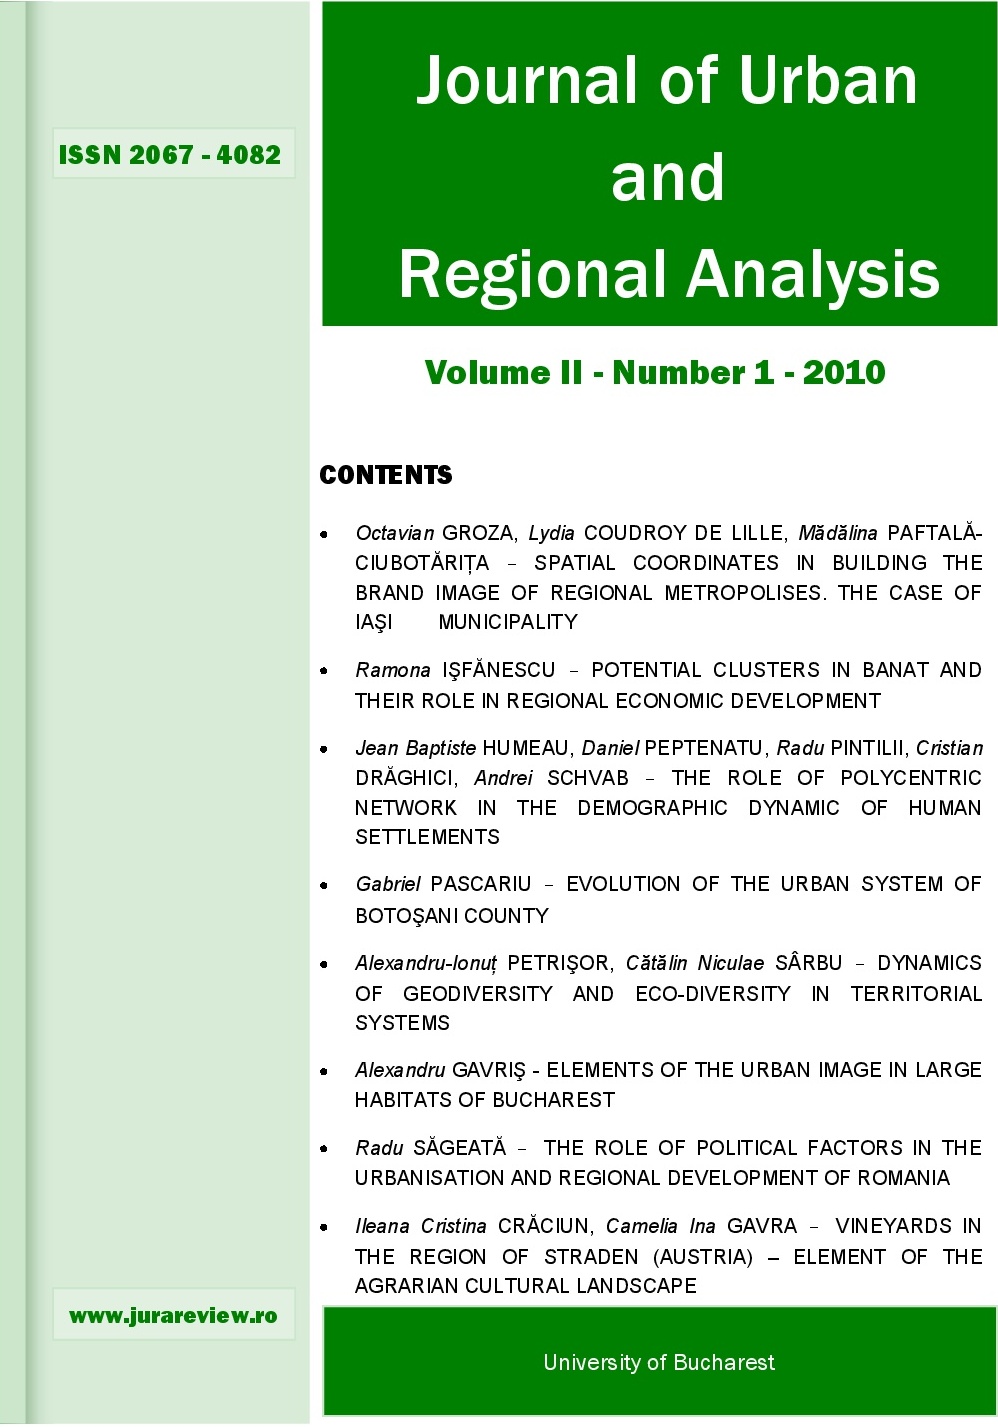 POTENTIAL CLUSTERS IN BANAT AND THEIR ROLE IN REGIONAL ECONOMIC DEVELOPMENT